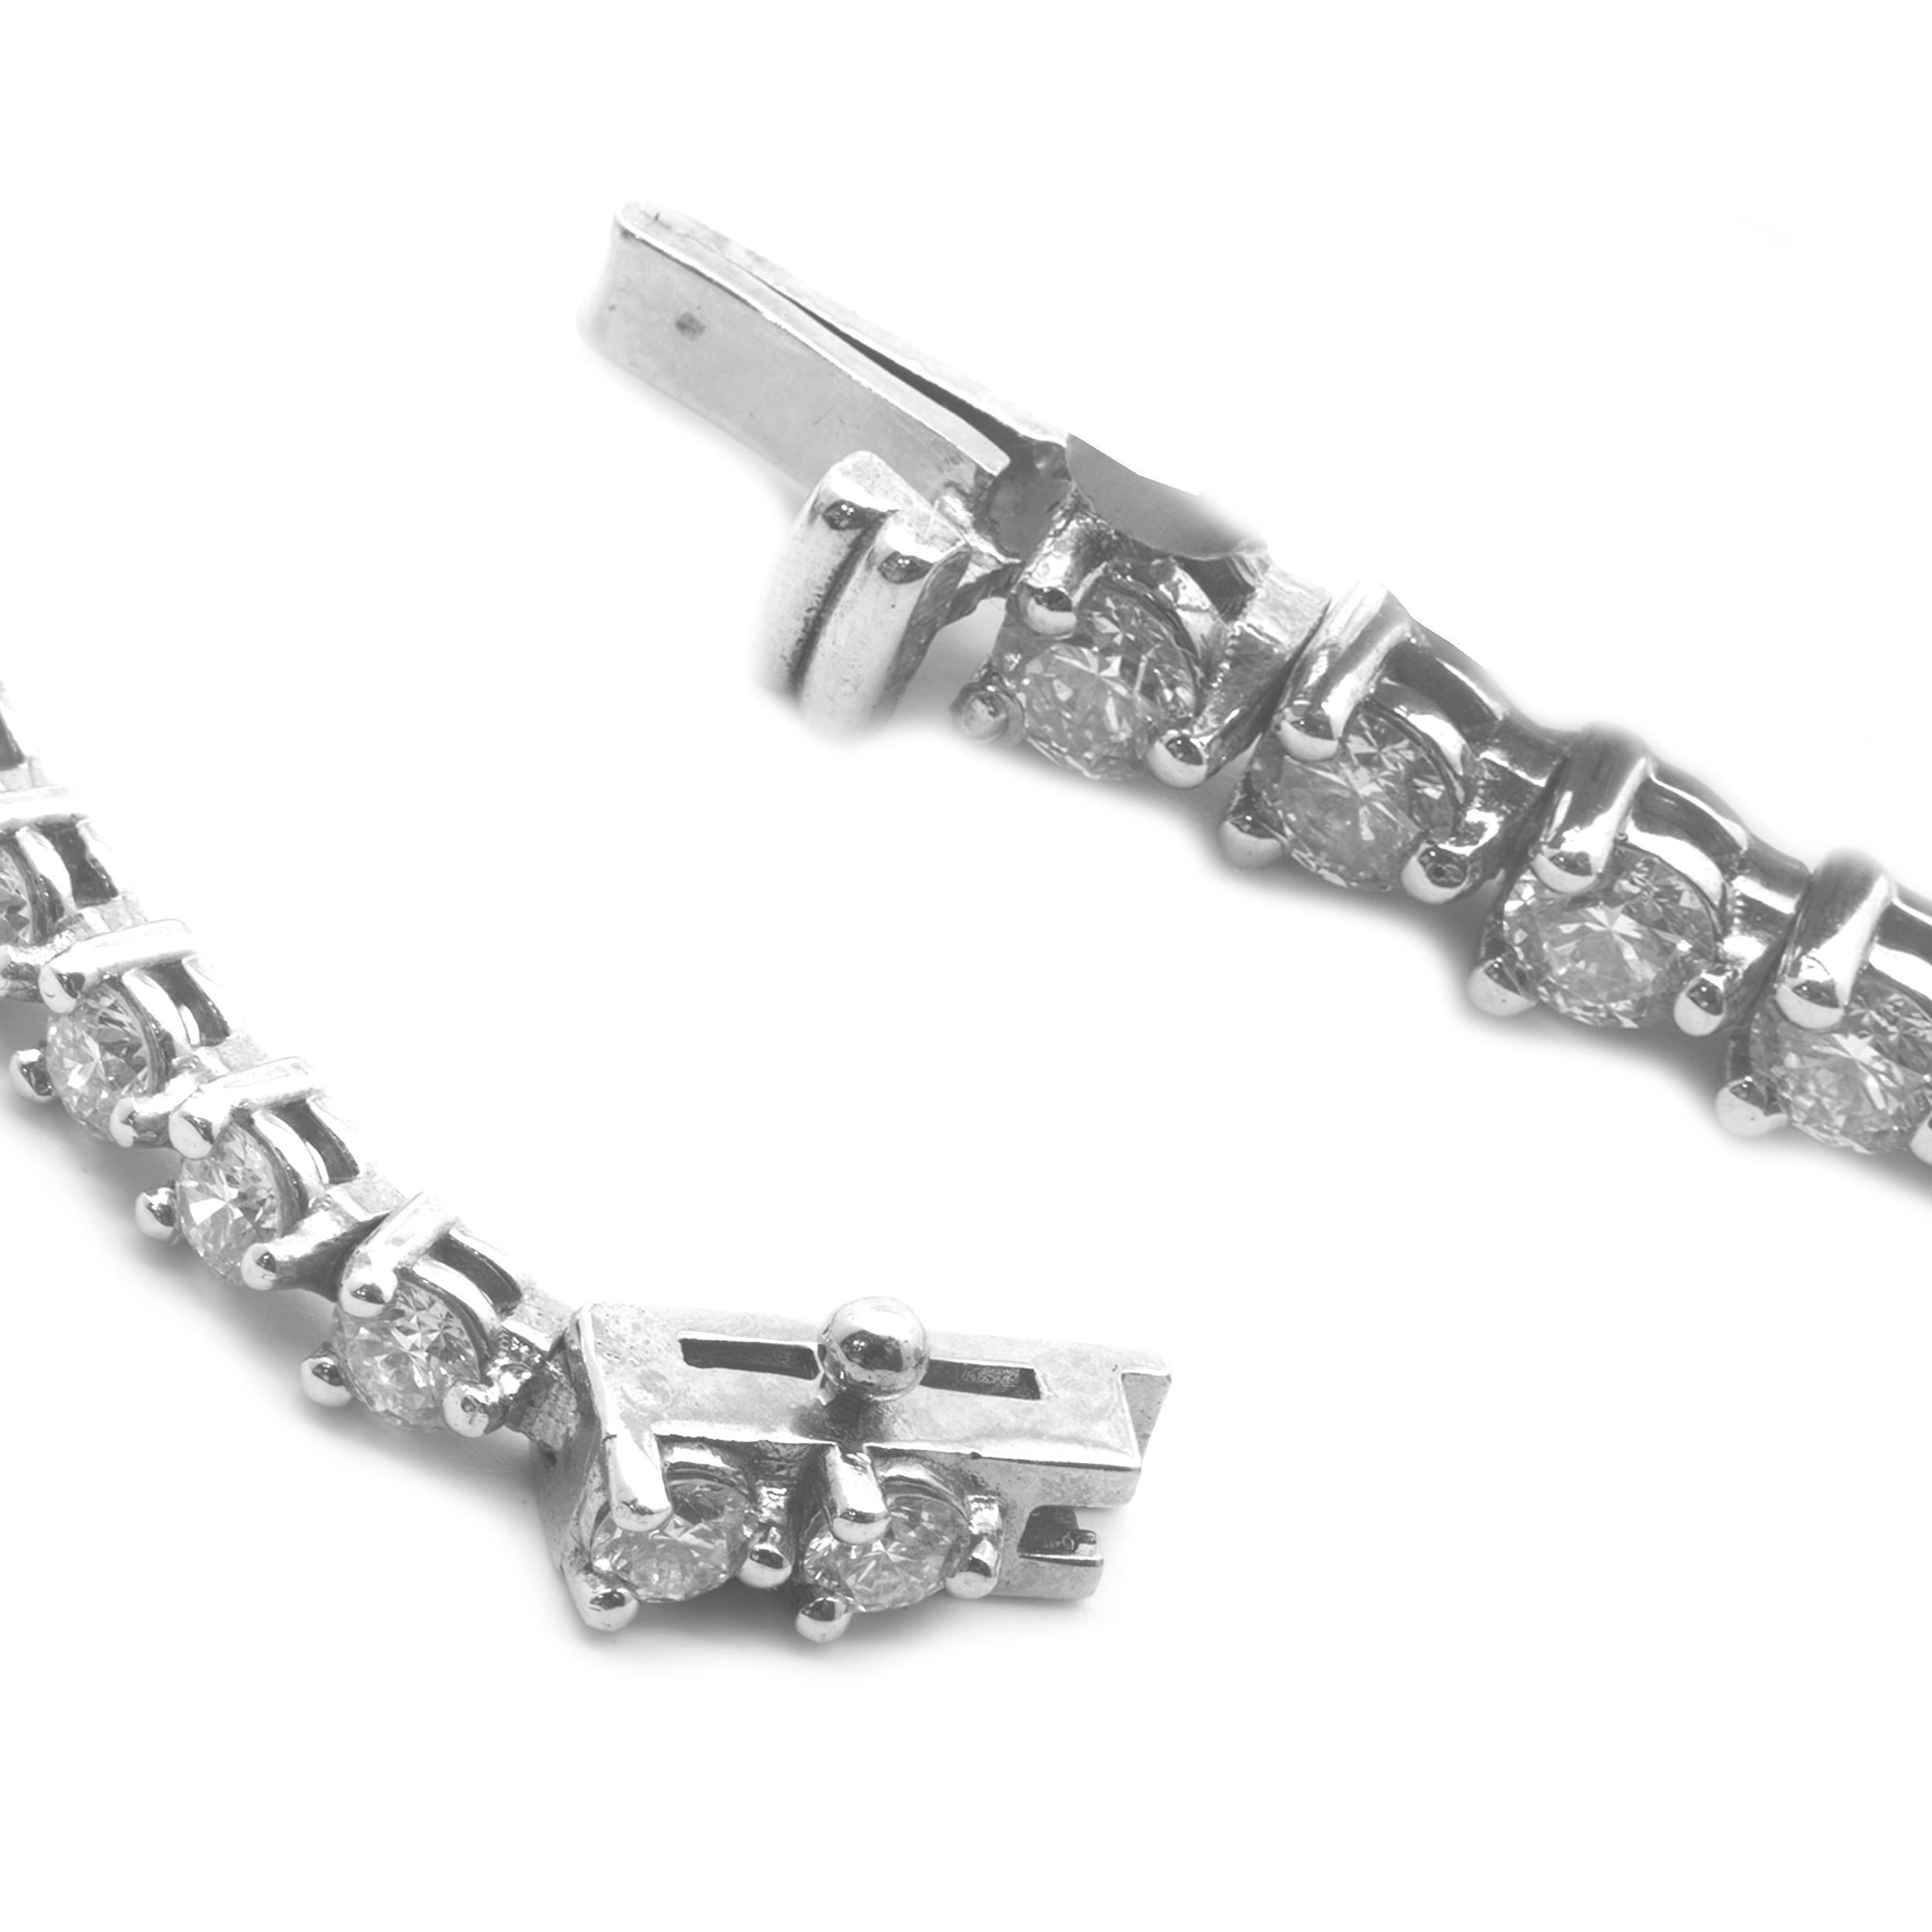 Material: 14K white gold
Diamonds: 53 round brilliant cut = 3.32cttw
Color: H
Clarity: SI1
Dimensions: bracelet will fit up to a 7 -inch wrist
Weight: 8.23 grams
